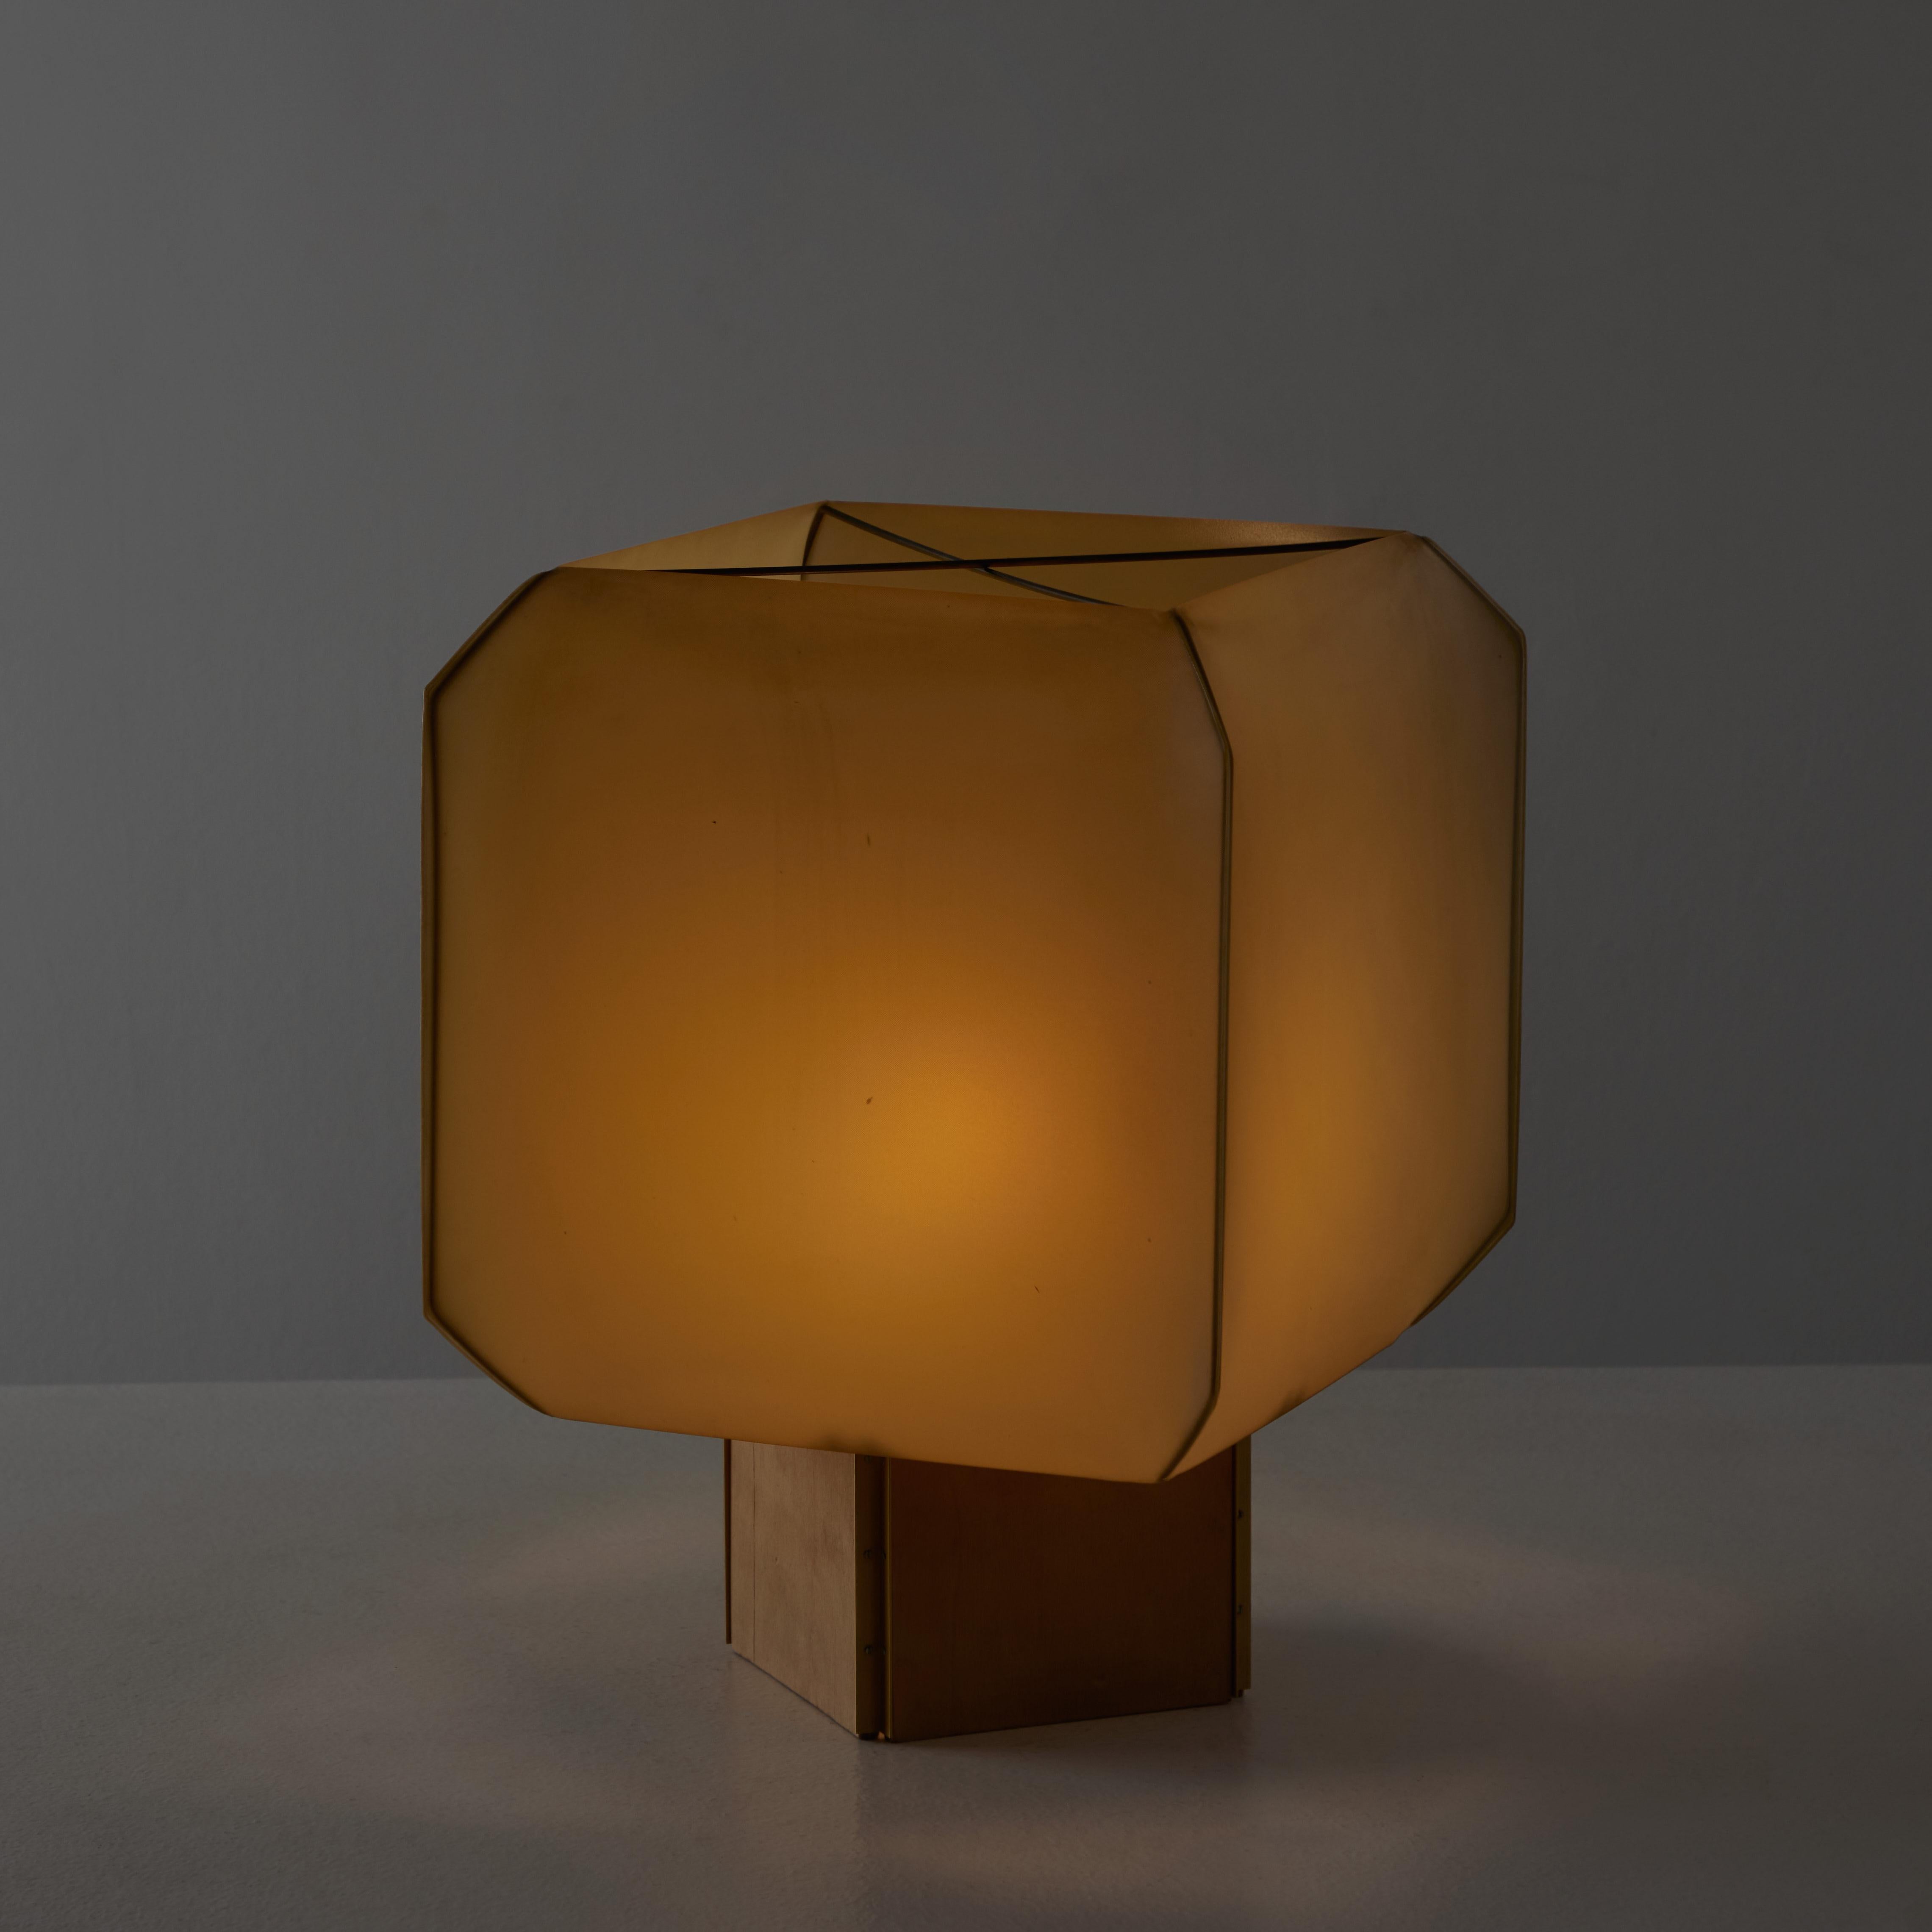 Bali table lamp by Bruno Munari for Danese. Designed and manufactured in Italy, 1958. Resin fabric shade and wooden base. Original cord with on/off switch. Holds a single E27 socket, adapted for the US. We recommend one 40w maximum bulb. Bulb